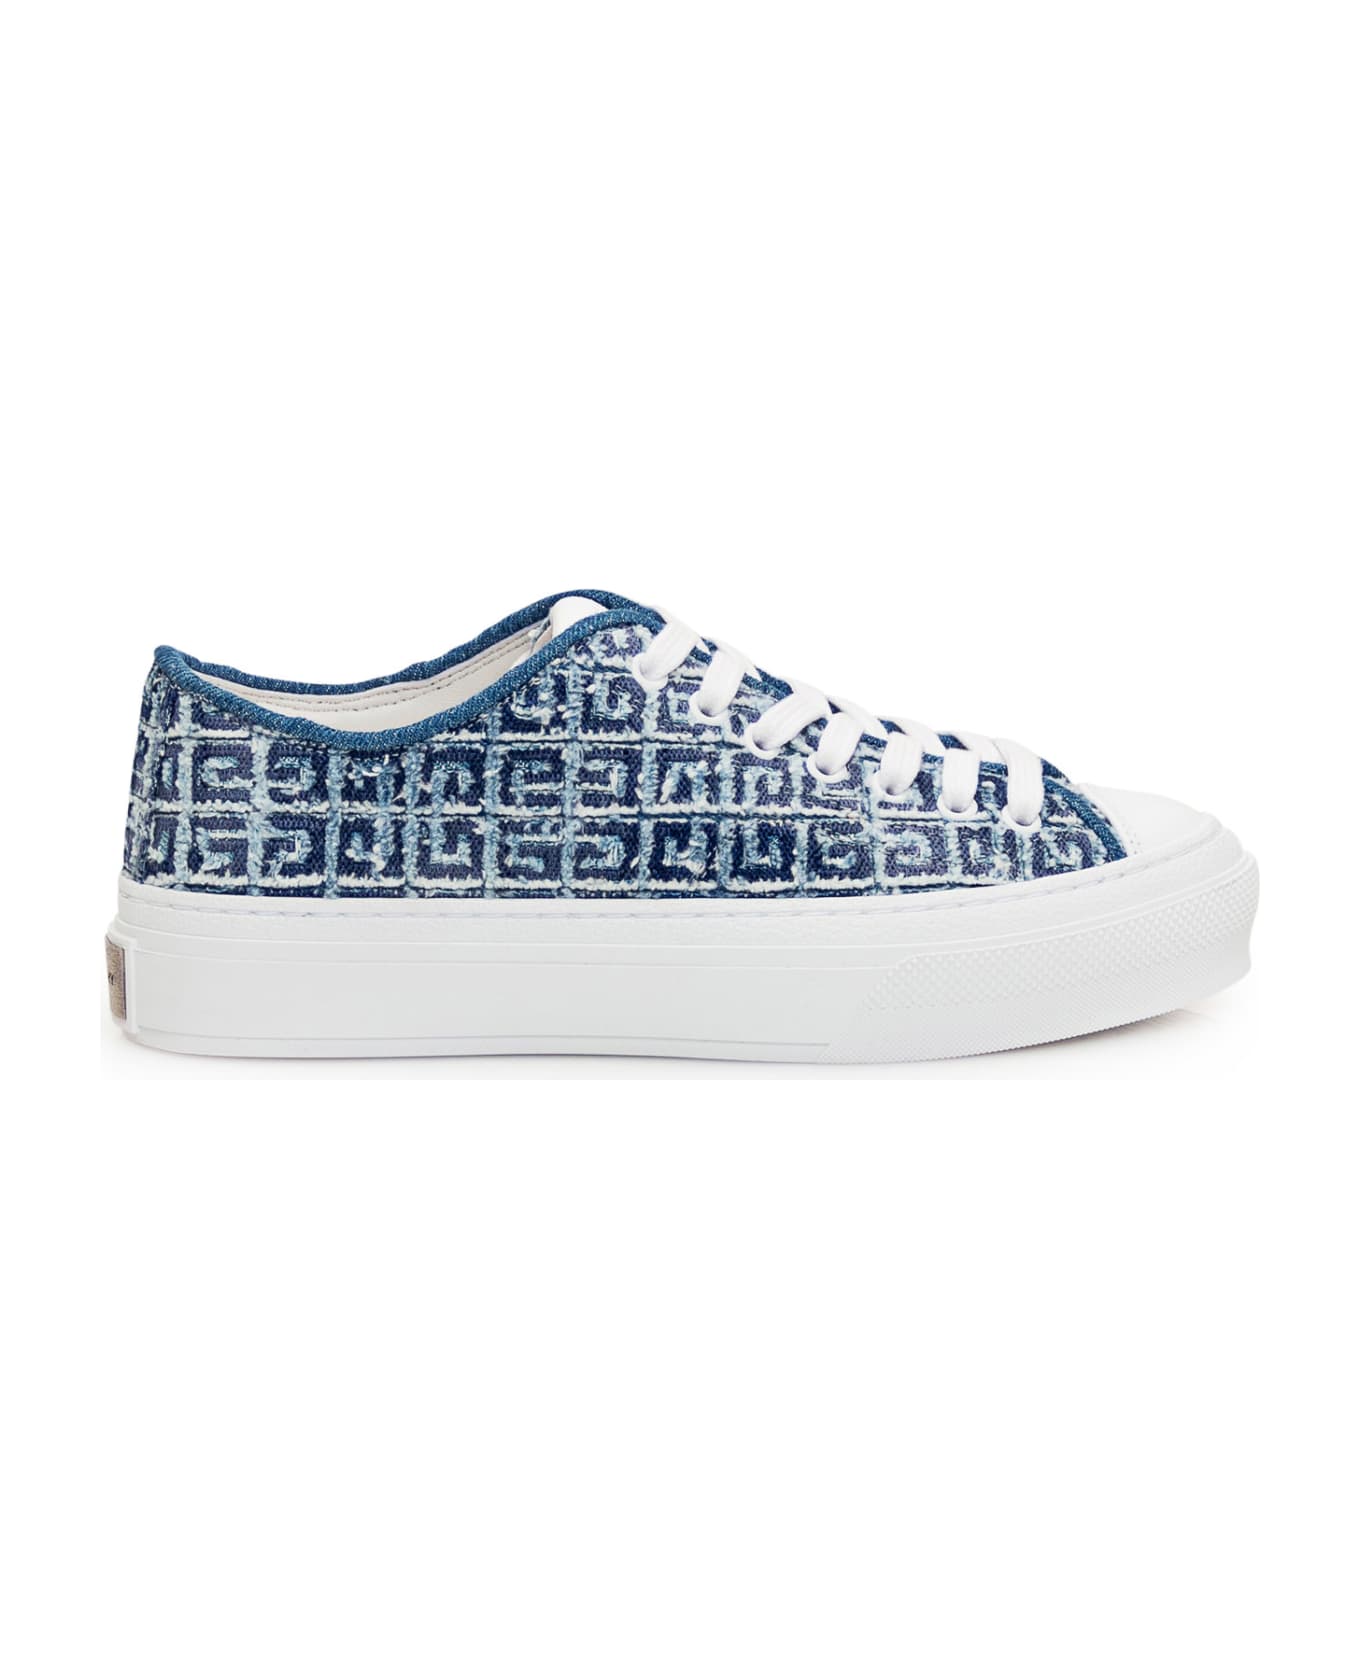 Givenchy City Low Sneakers - MEDIUM BLUE スニーカー